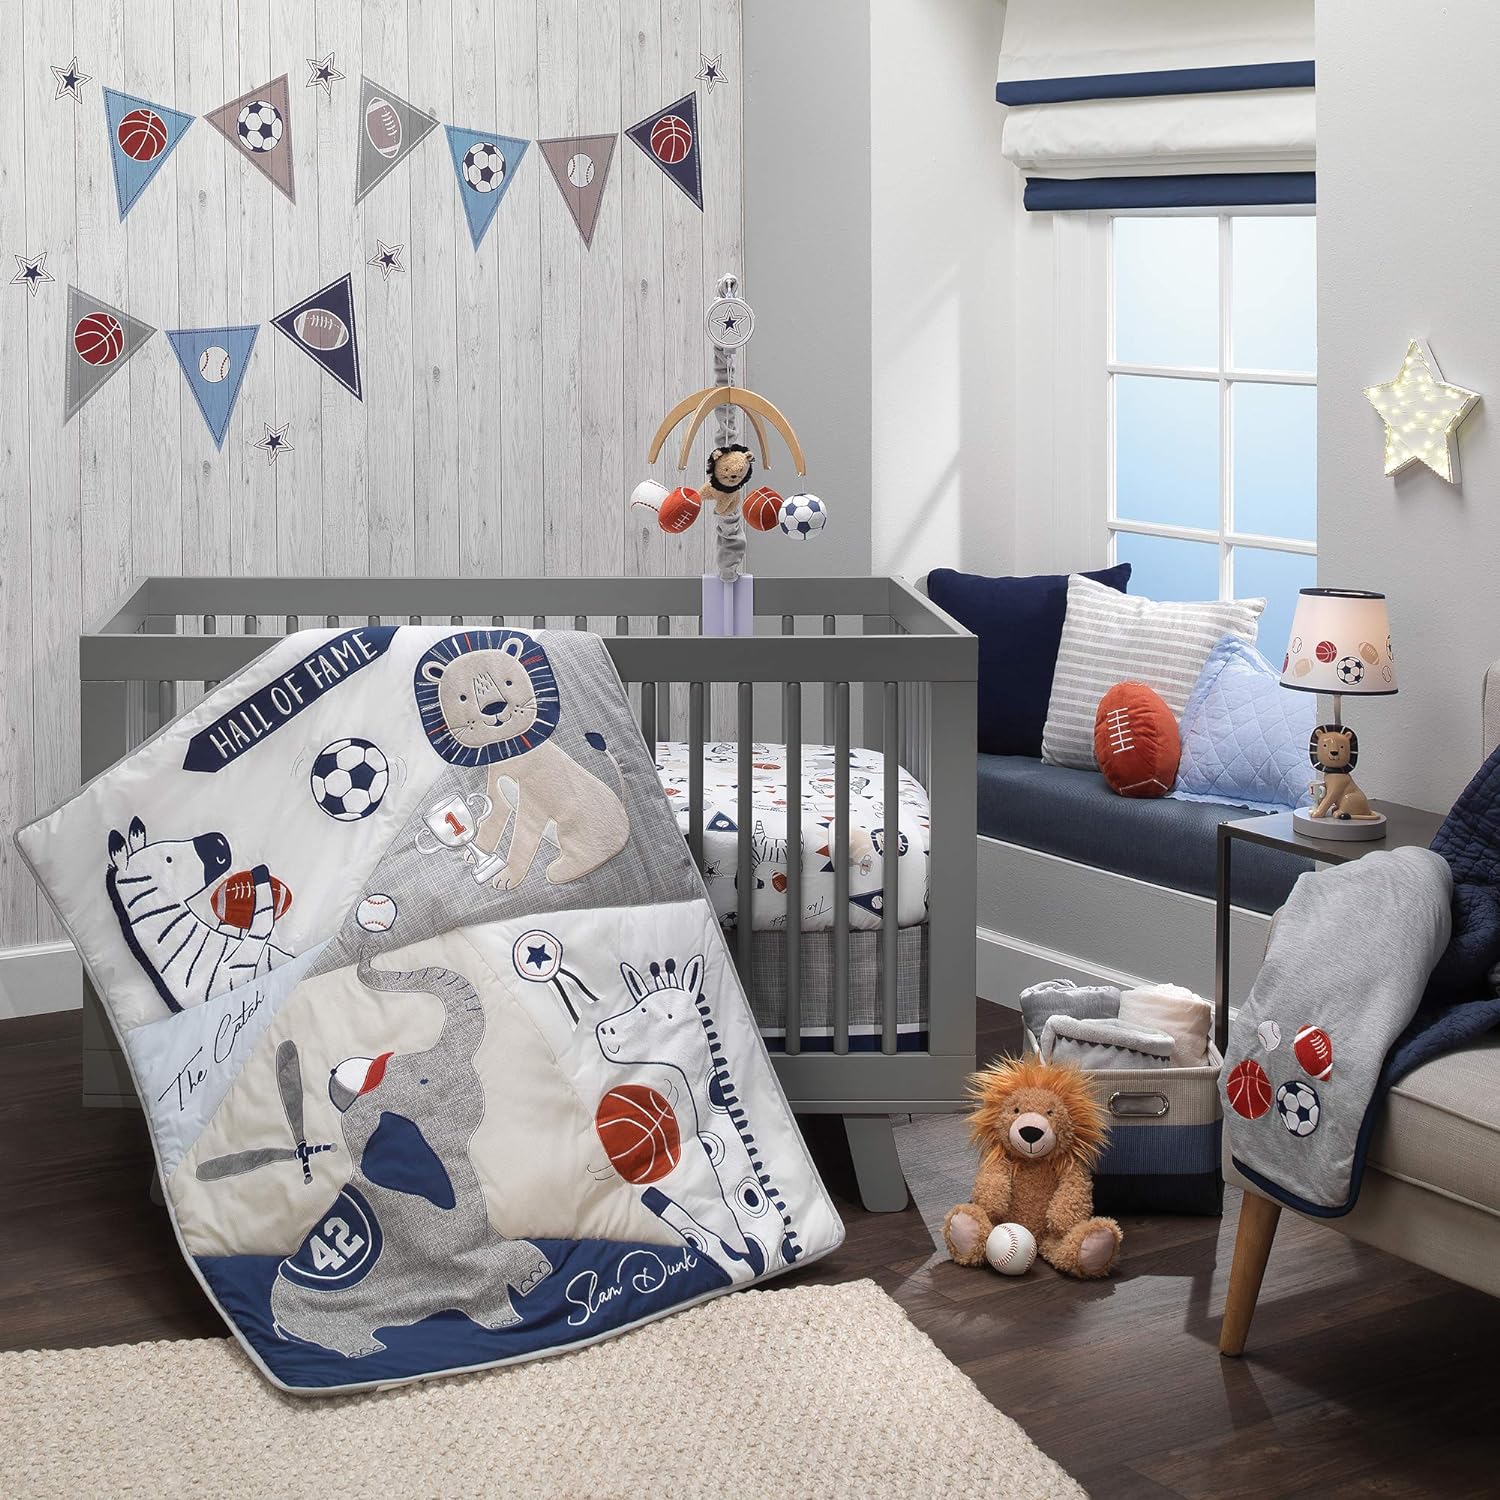 Game On! Unleash the Playful Spirit with Lambs & Ivy Hall of Fame Sports Animals 5-Piece Crib Bedding Set in Gray/Blue